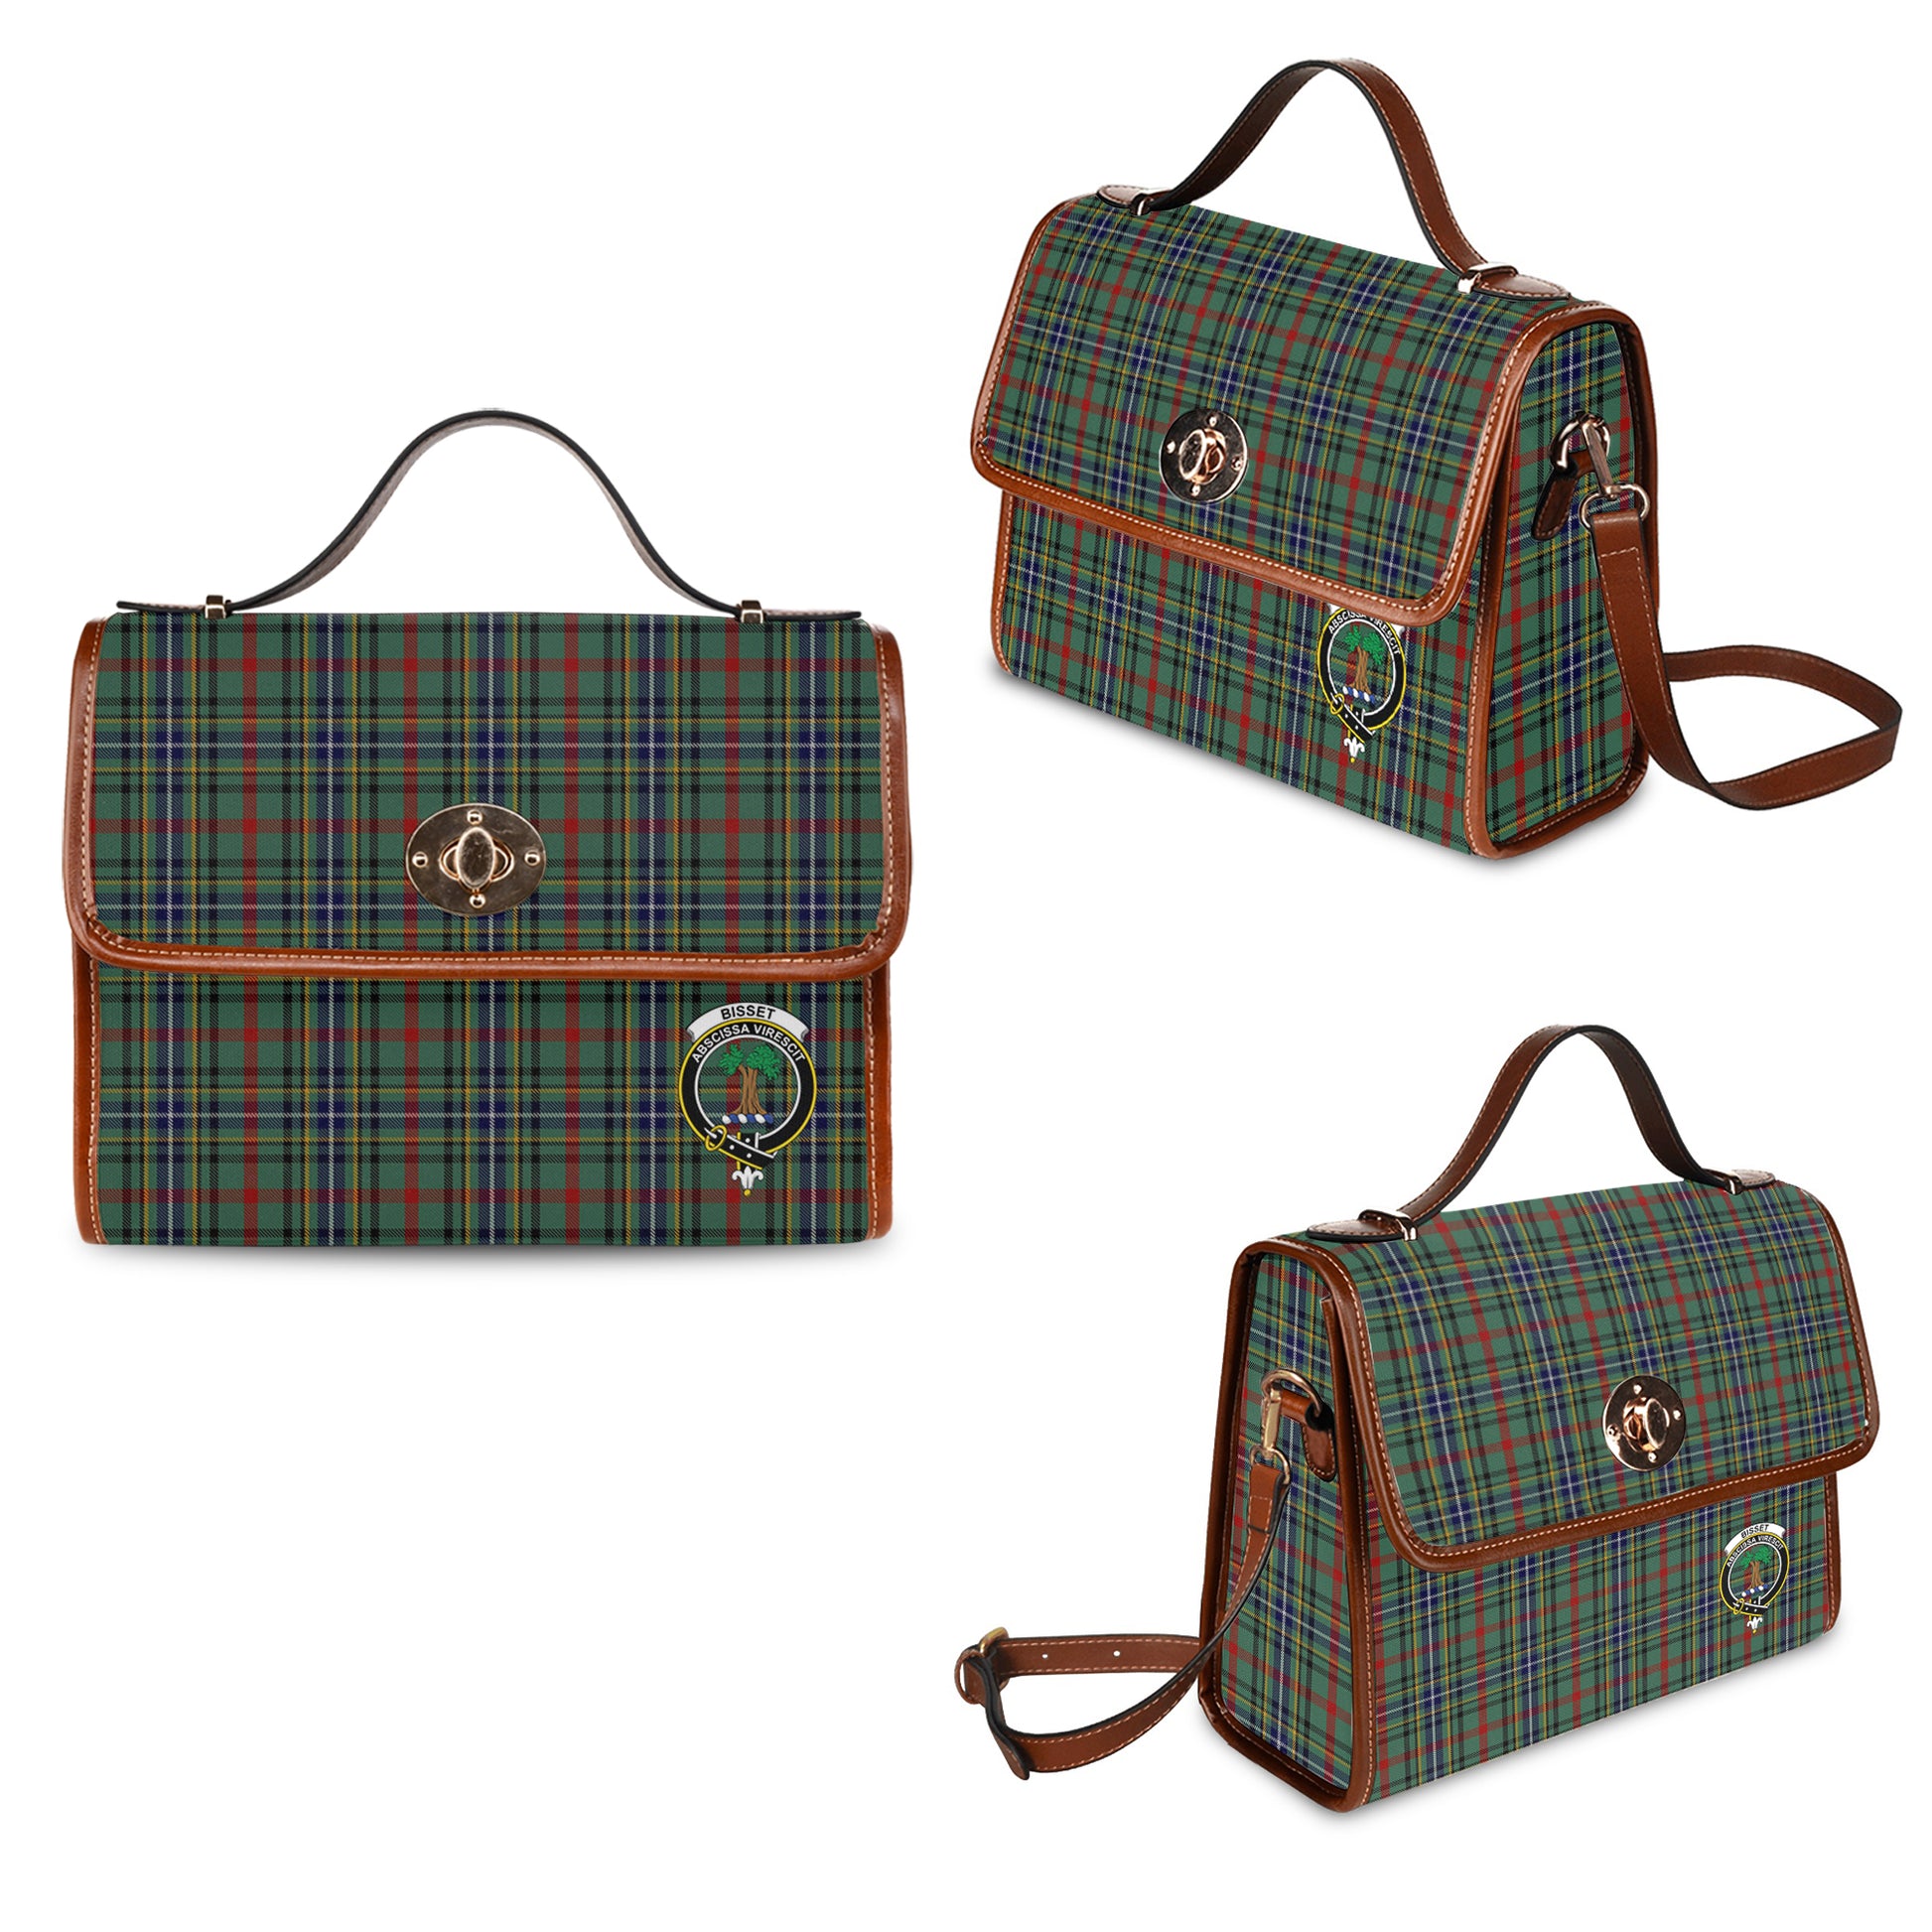 Bisset Tartan Leather Strap Waterproof Canvas Bag with Family Crest One Size 34cm * 42cm (13.4" x 16.5") - Tartanvibesclothing